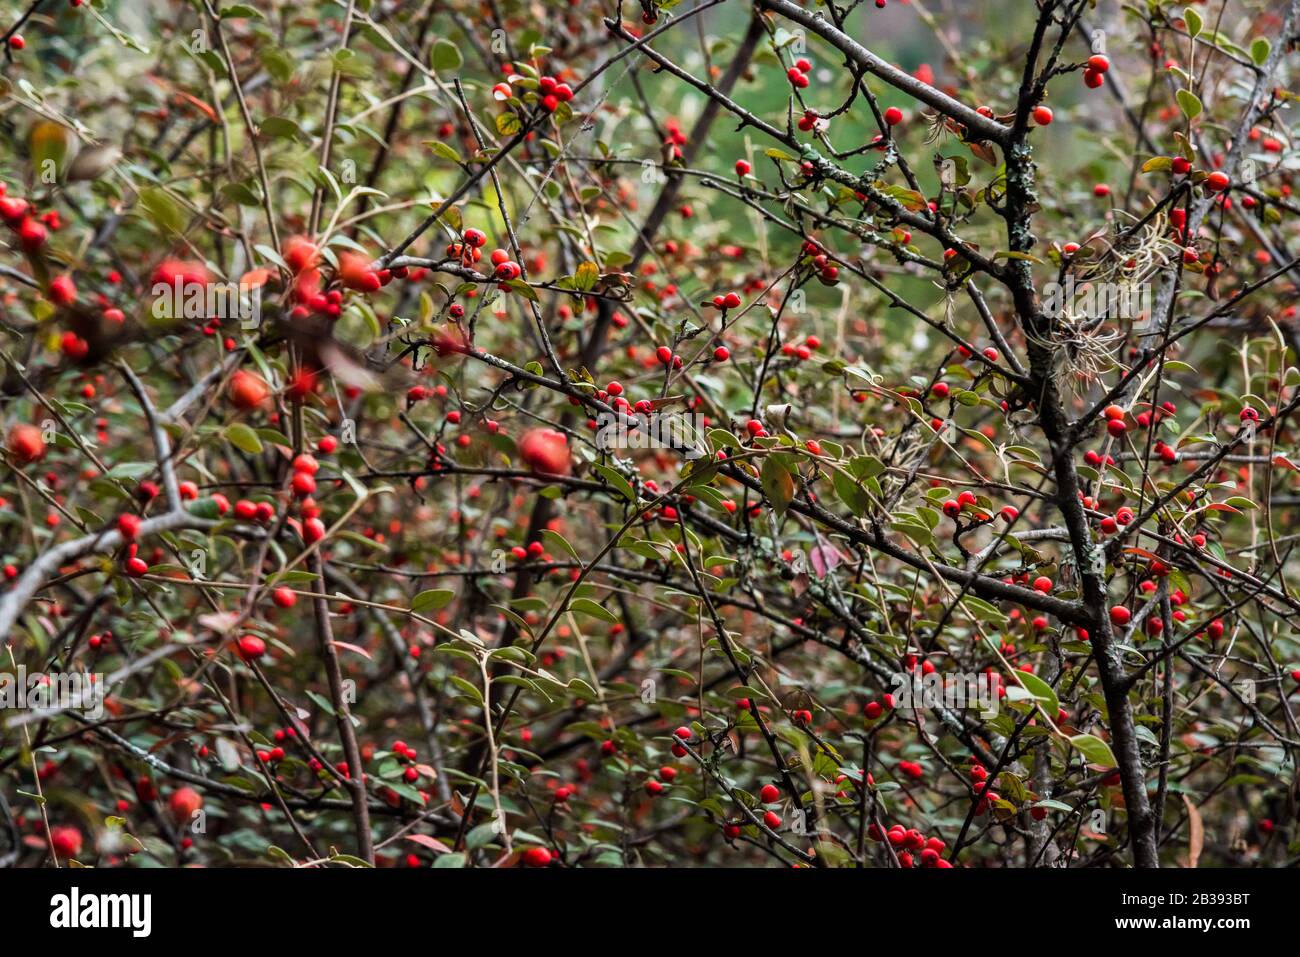 Branches of a bush filled with red berries on them Stock Photo